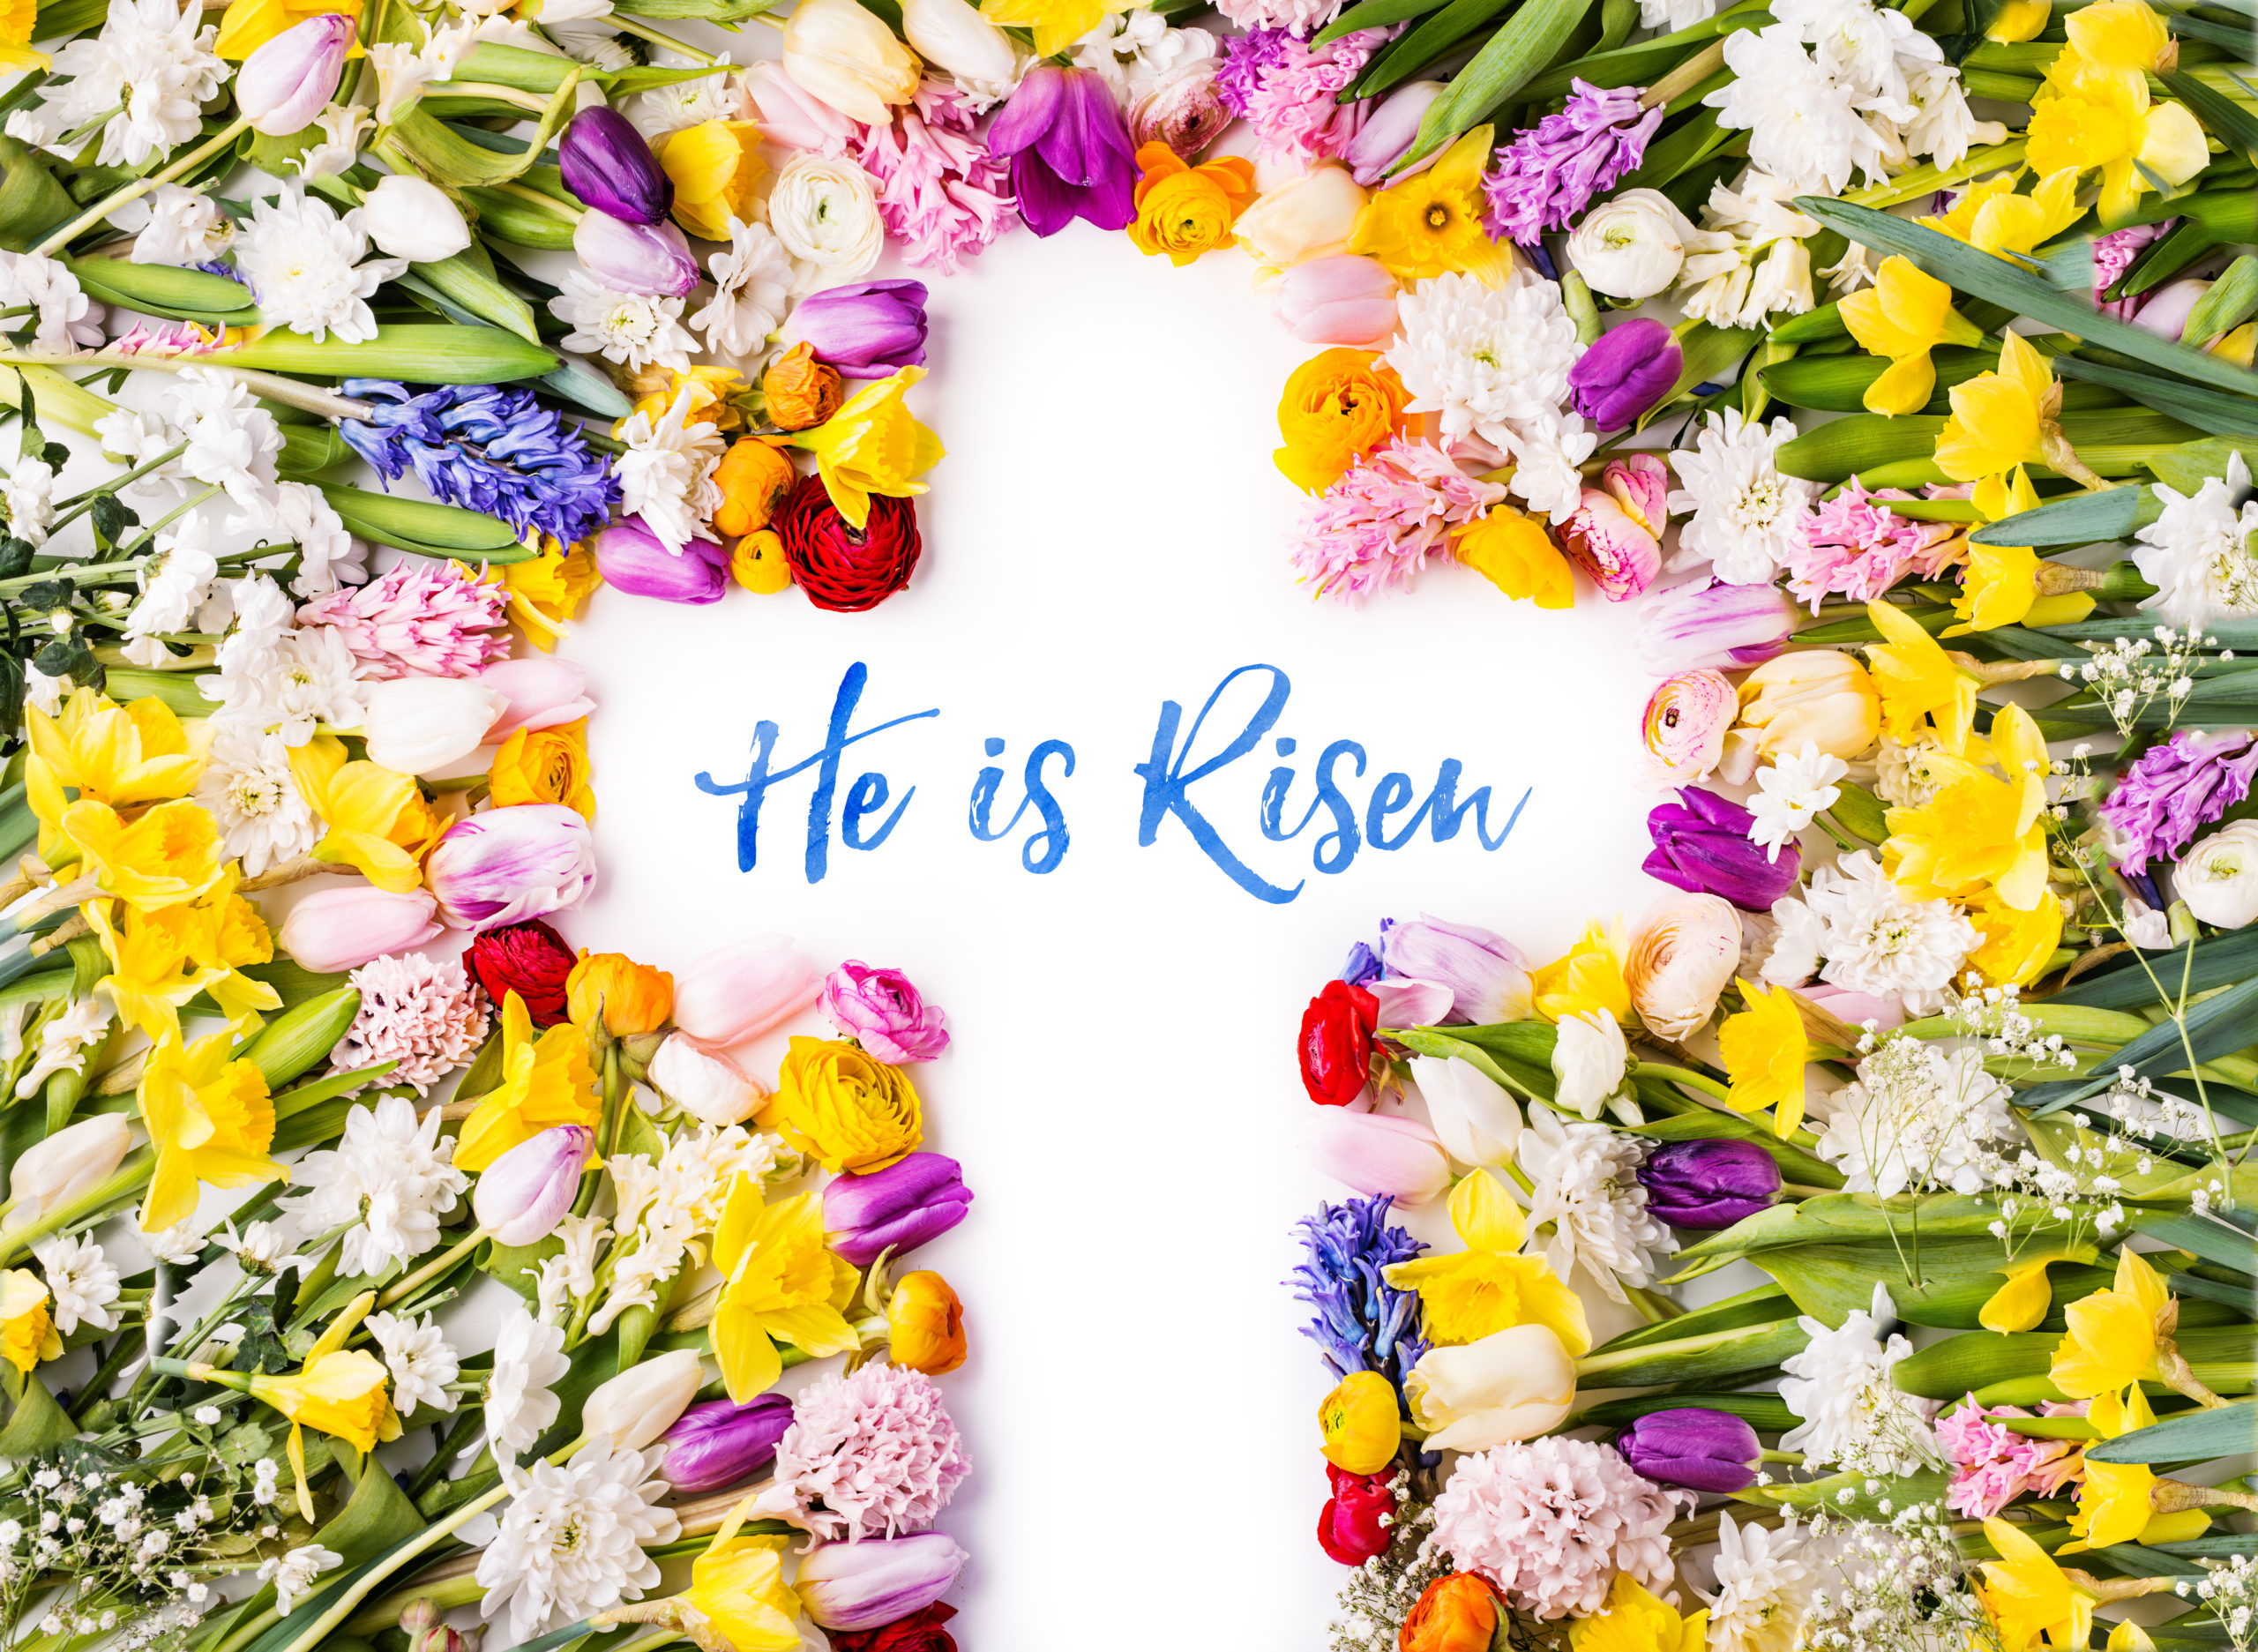 He is risen phrase on a cross. Colorful flowers background. Studio shot. Flat lay.